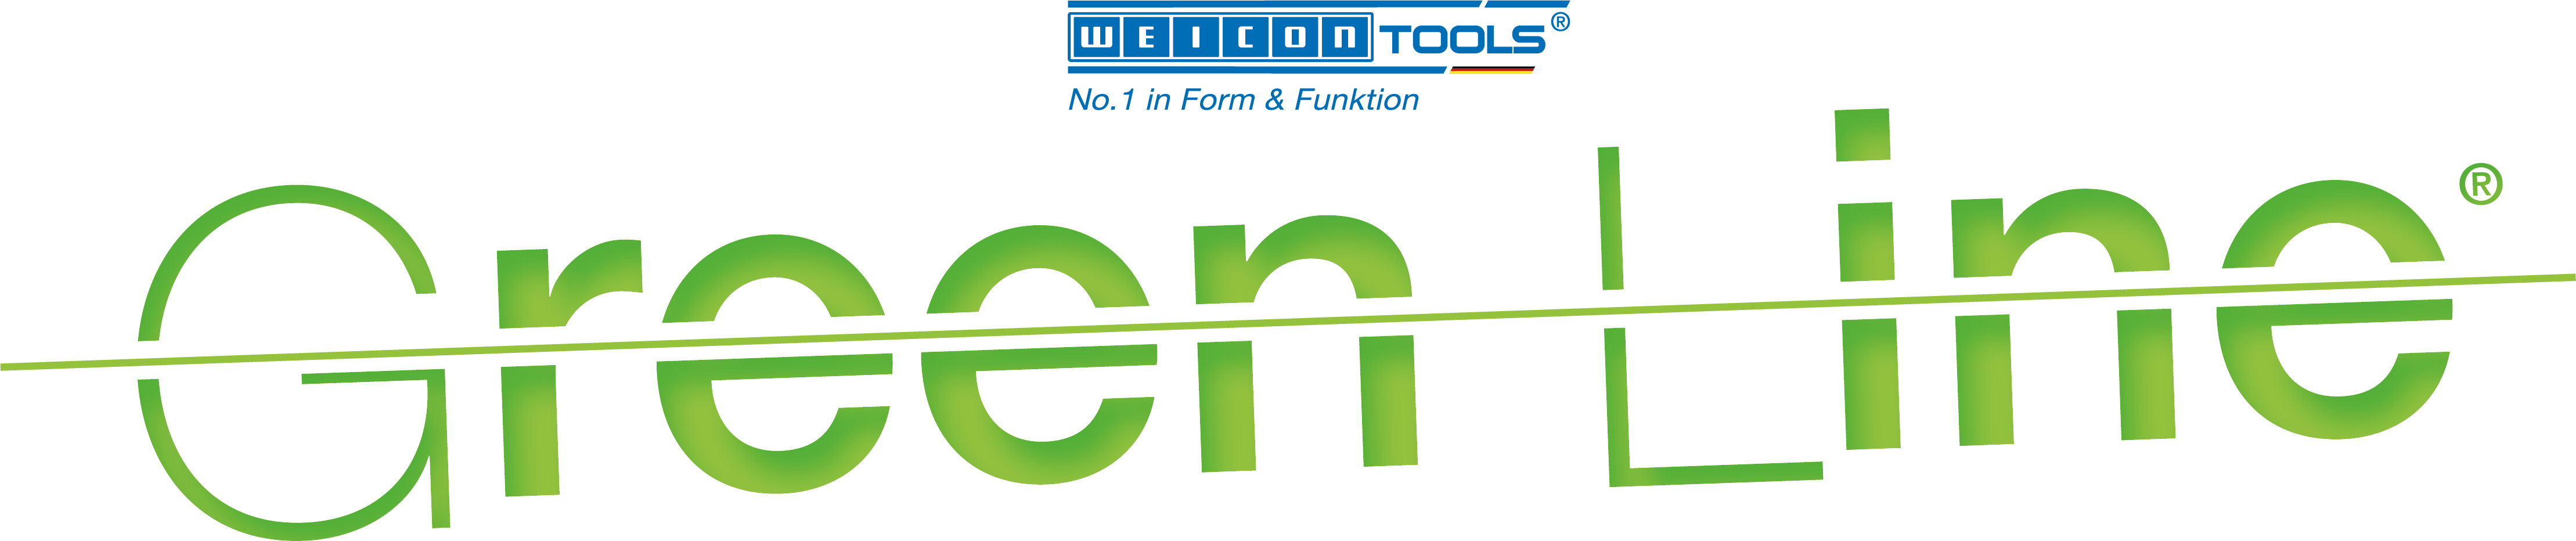 Logo Weicon Tools Green Line